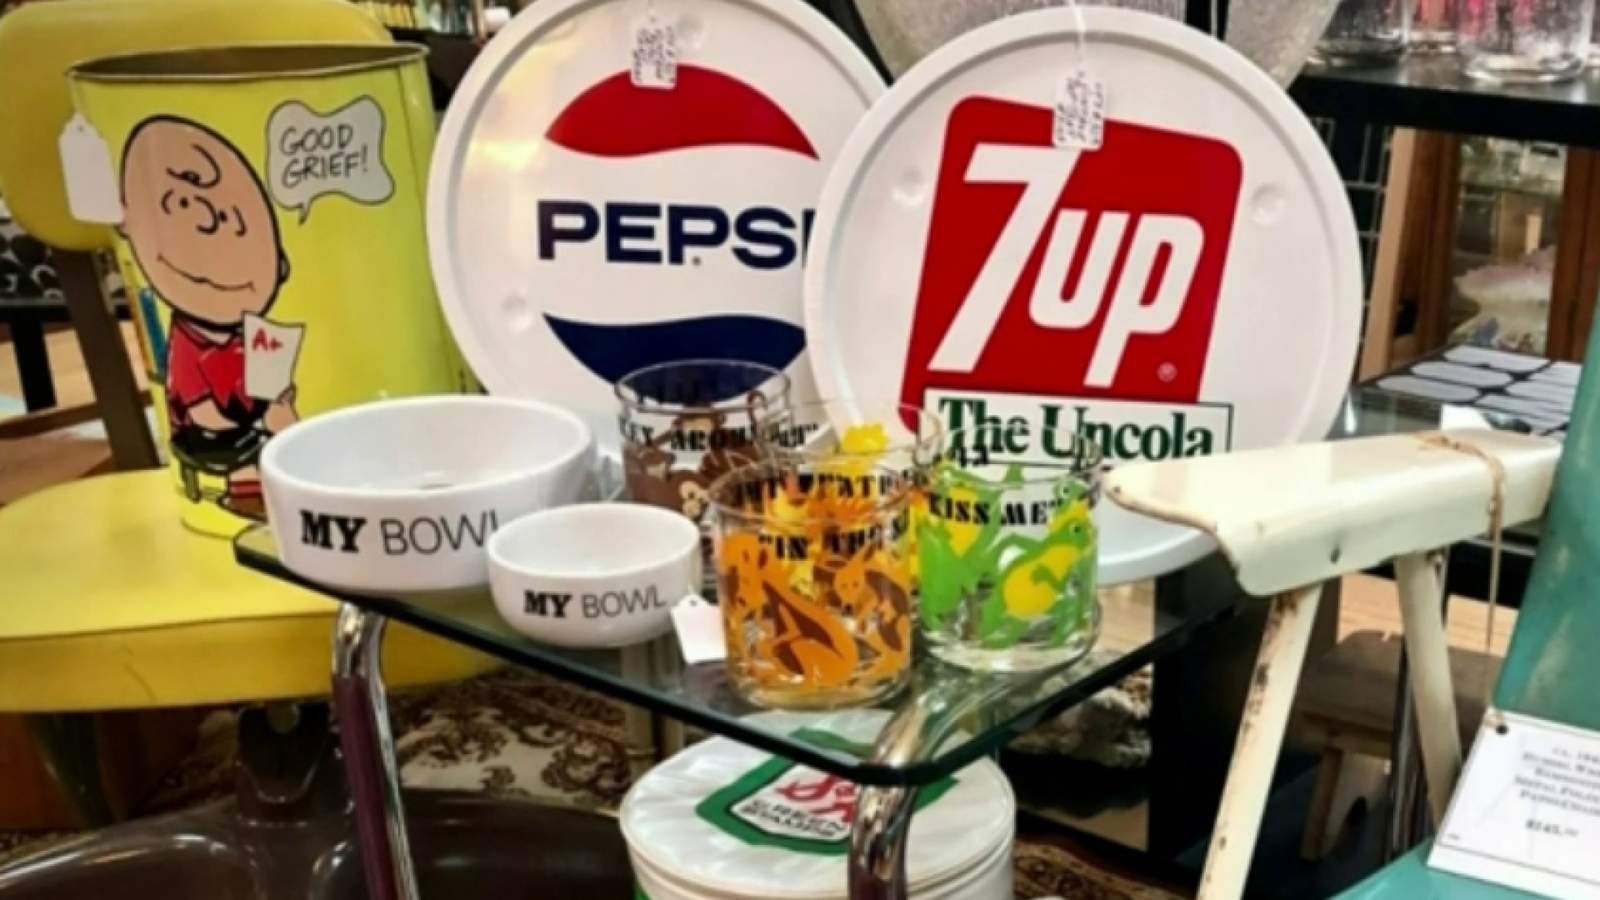 Celebrate National Retro Day with a trip to this local antiques shop